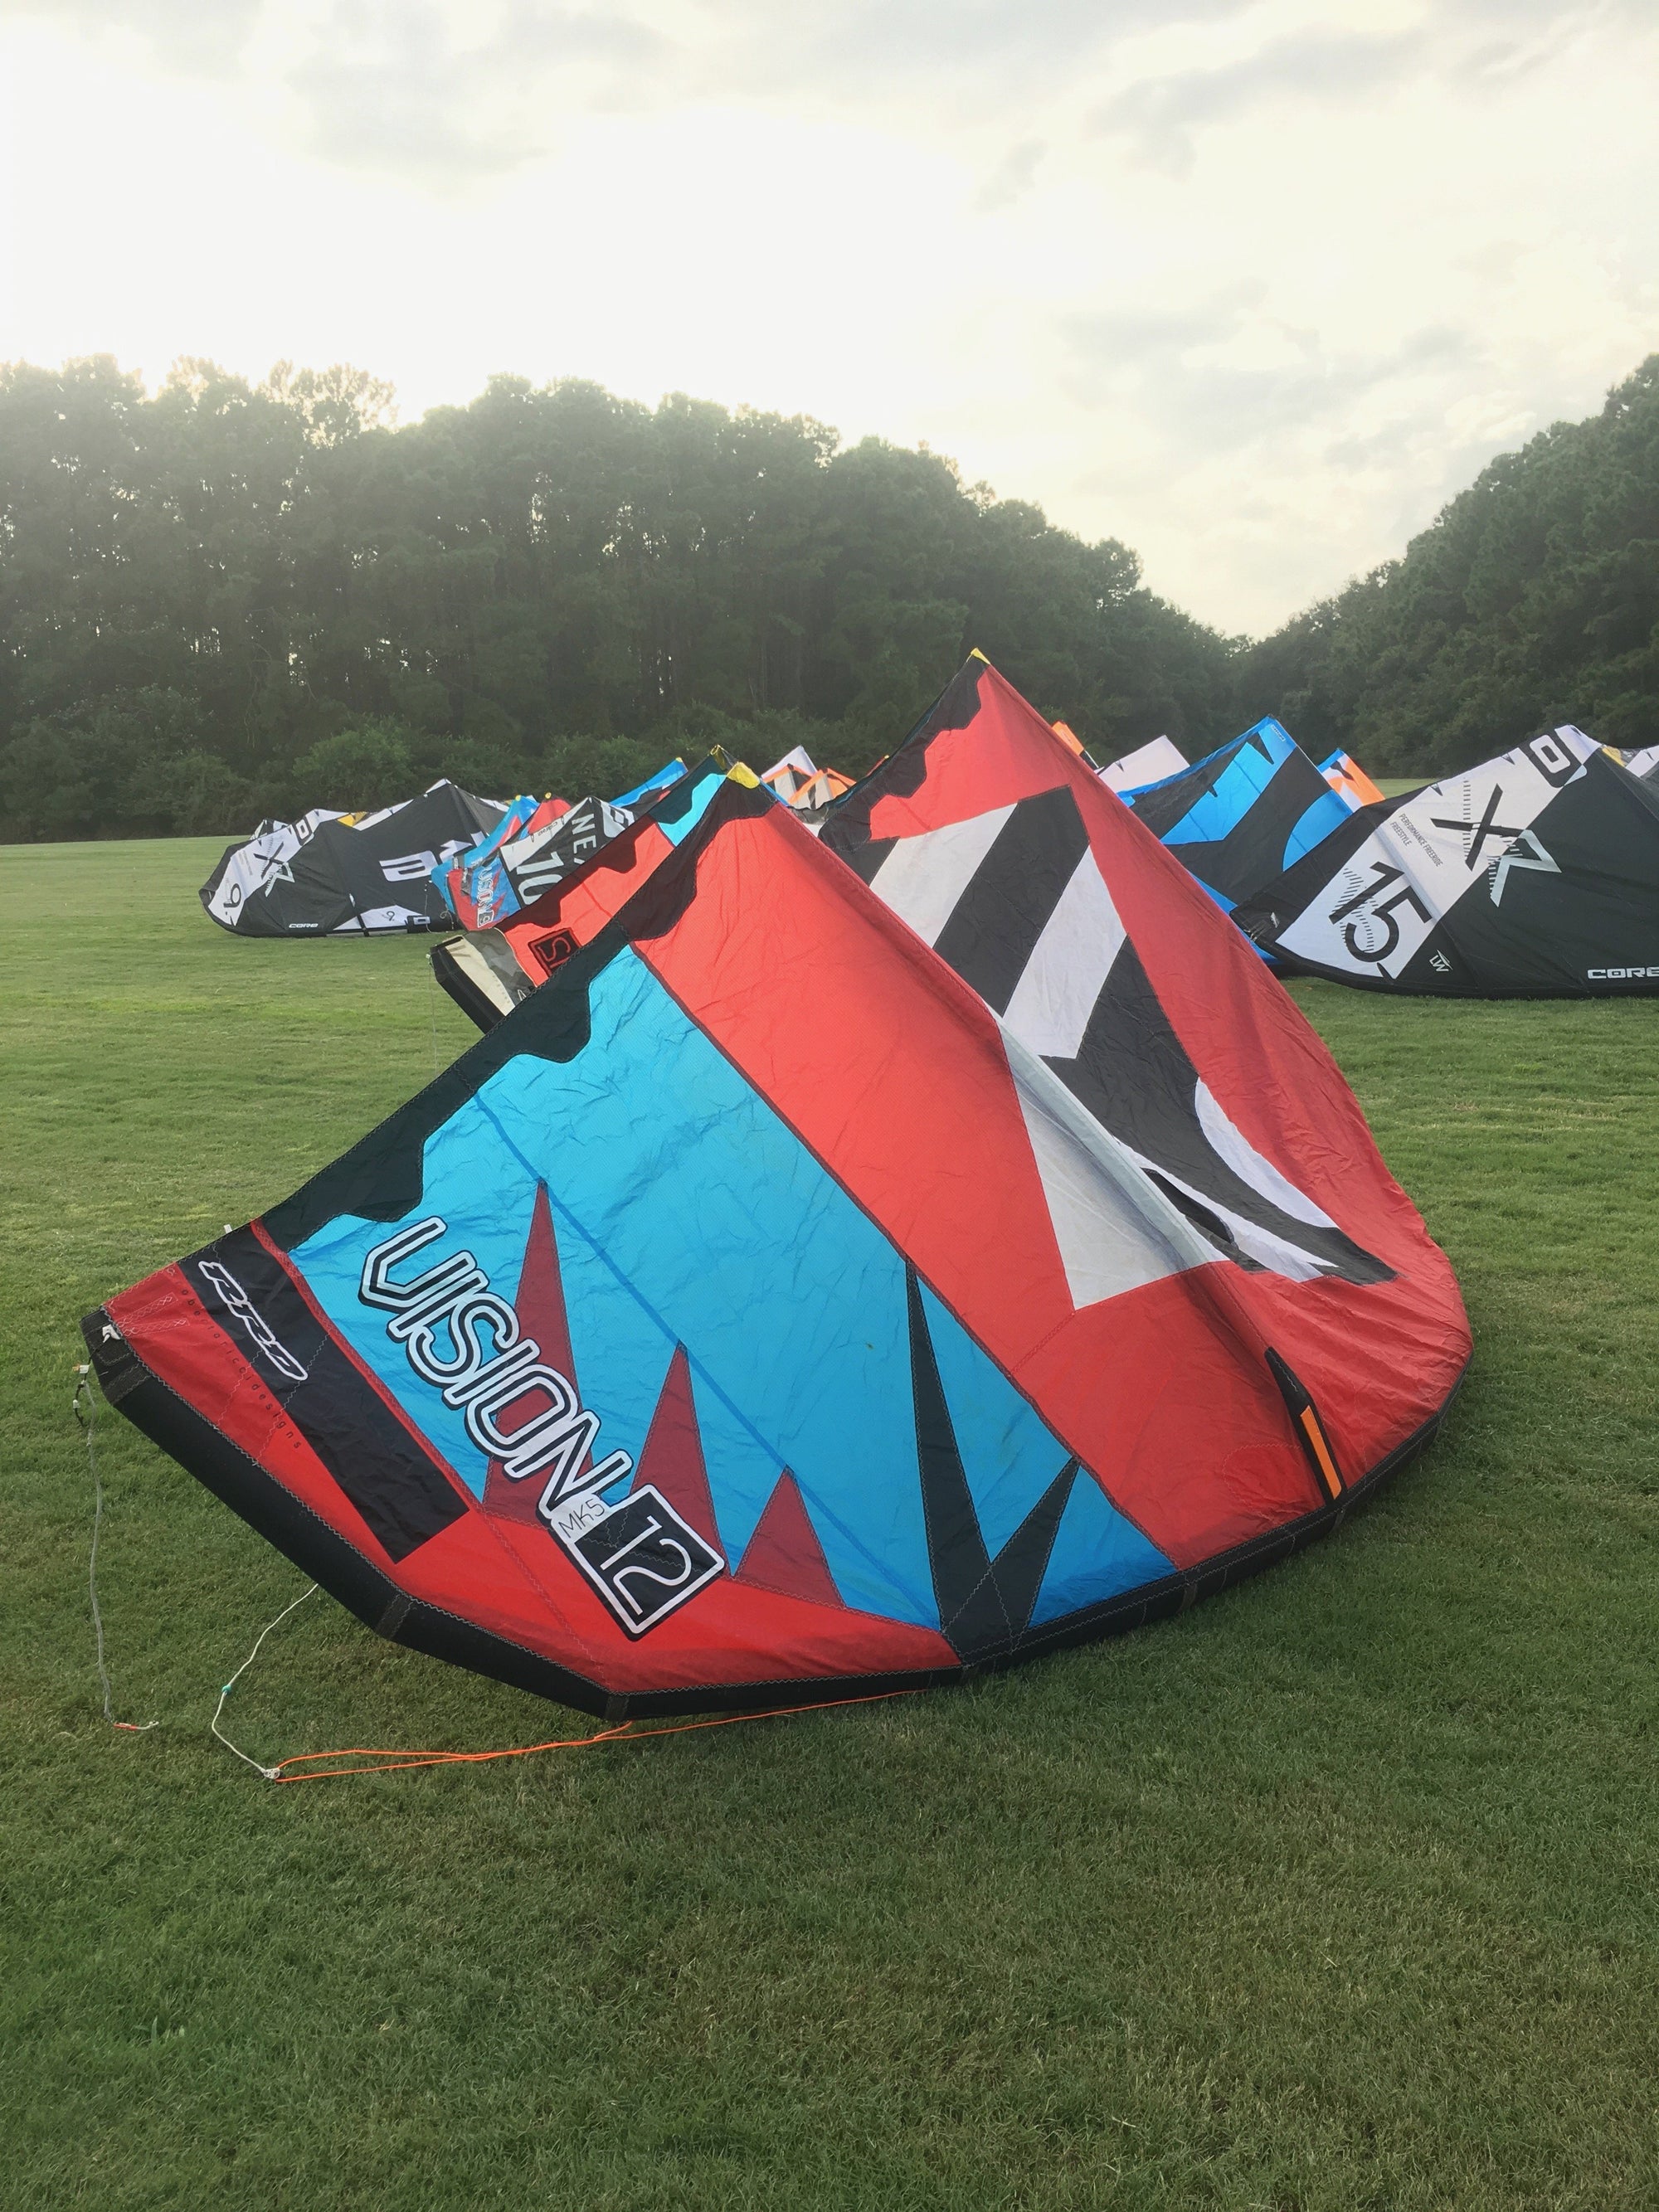 Used RRD Vision MK5 12.0 Kite - Cyan/Red Front